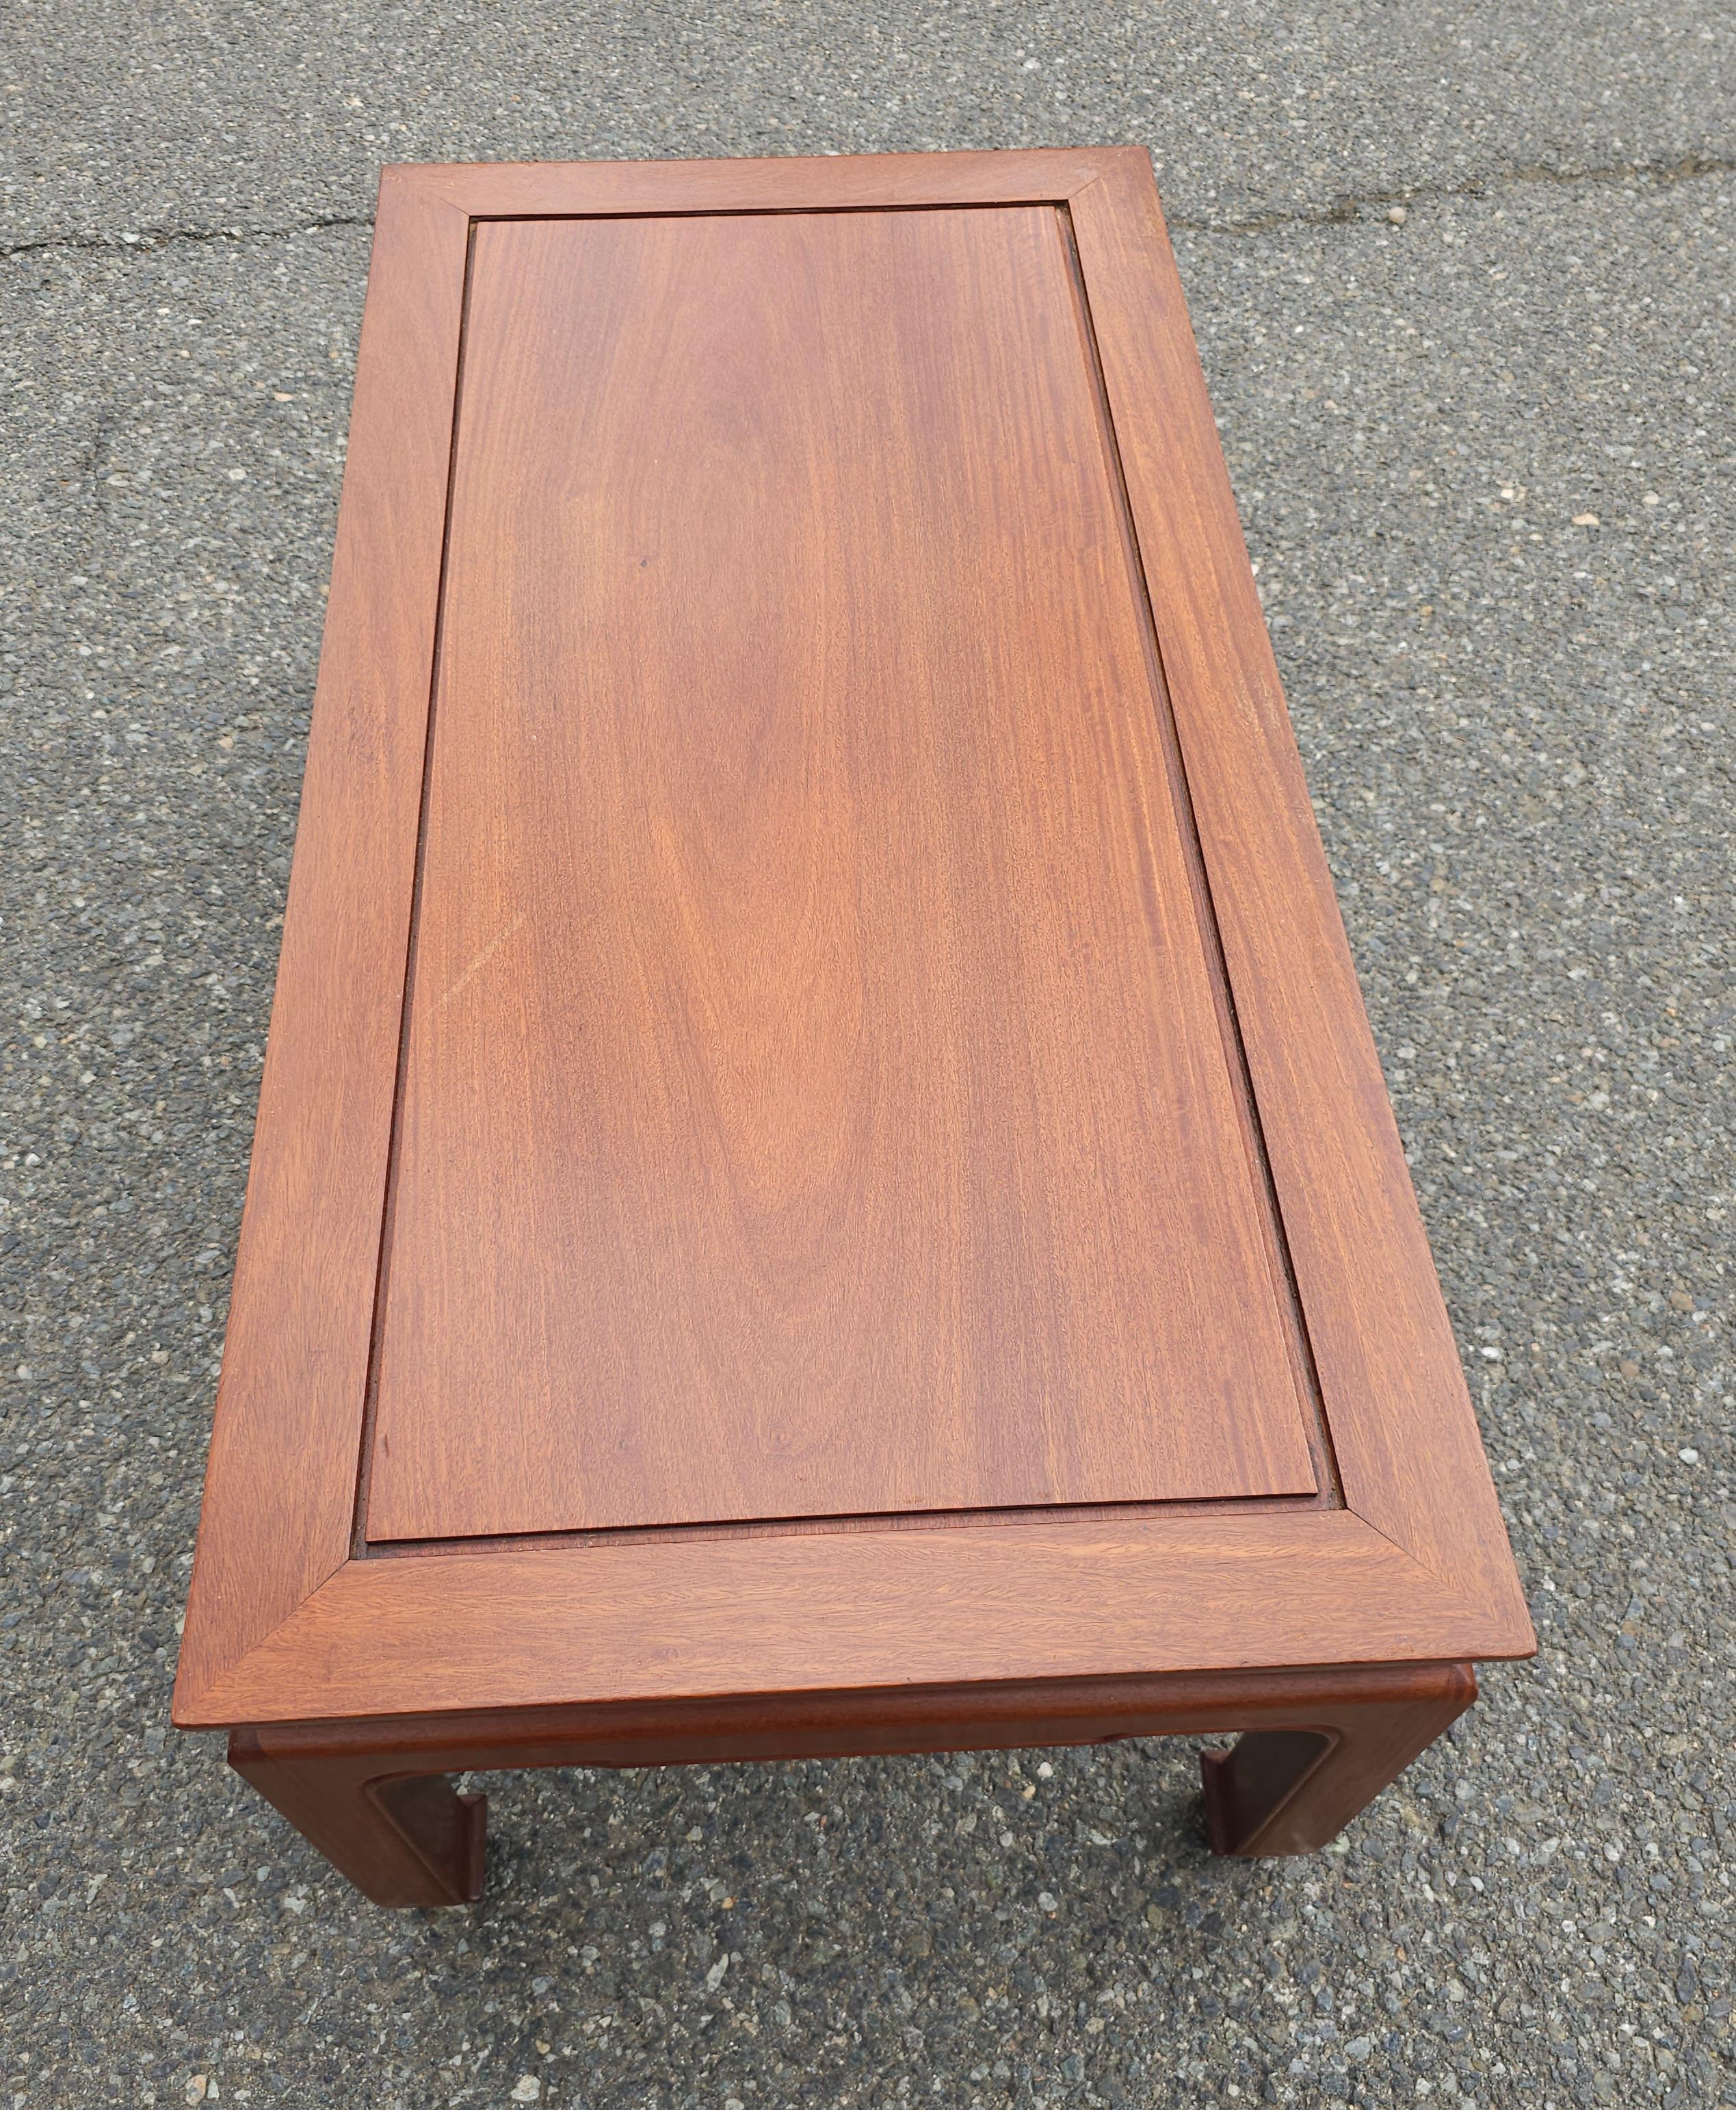 Mid 20th Century Ming Style Rosewood Coffe Table with Protective Glass Top In Excellent Condition For Sale In Germantown, MD